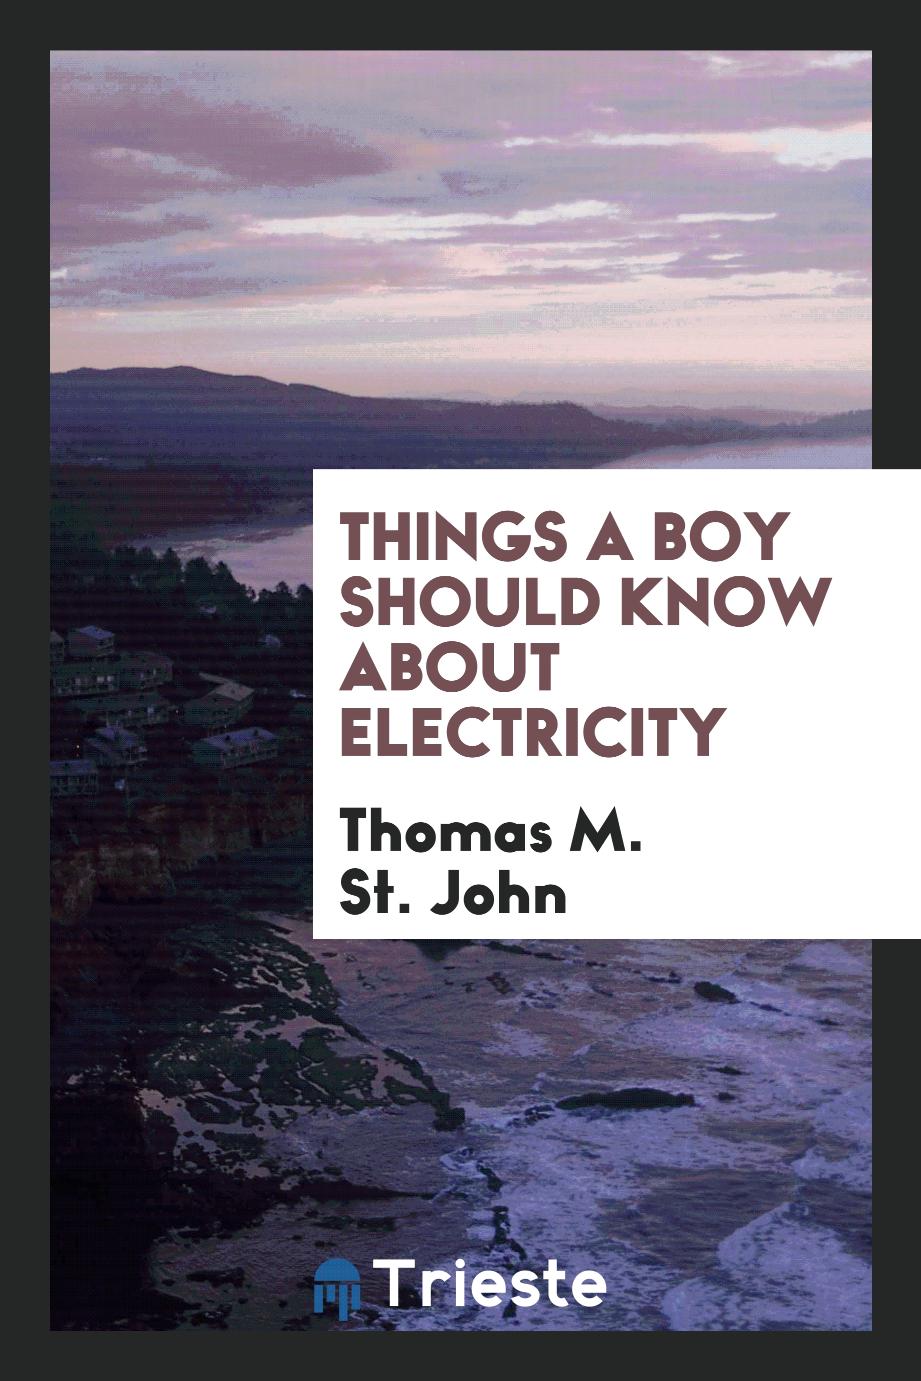 Things a boy should know about electricity